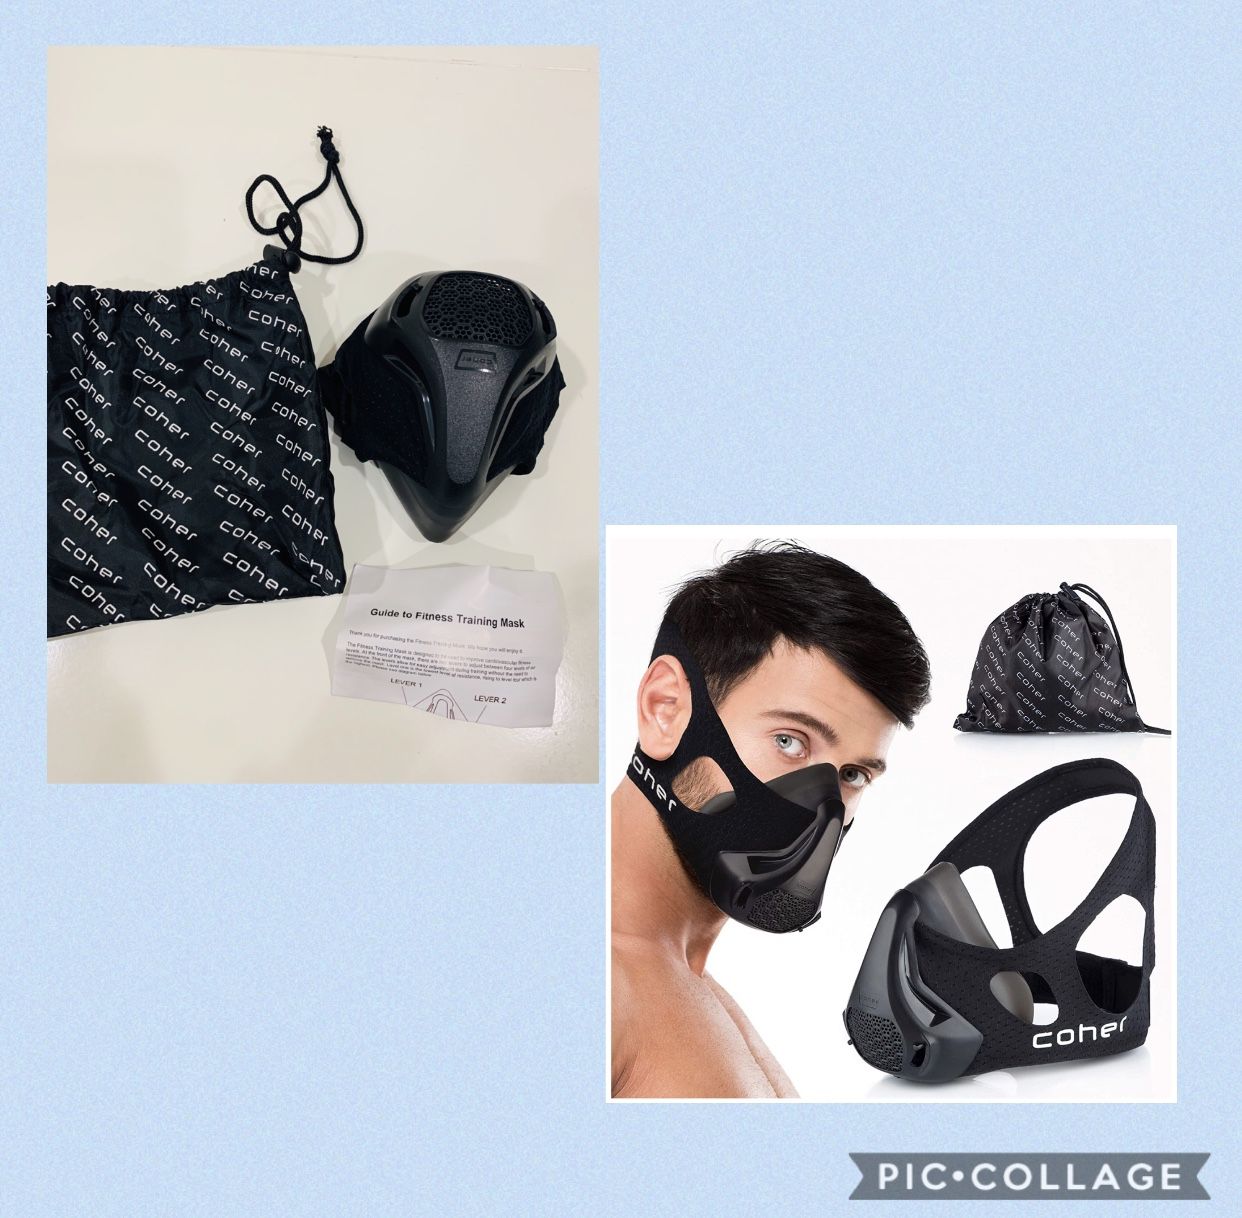 Training Mask Workout Breathing Mask for Men and Women - Adjustable Resistance Levels - Increase Lung Capacity and Endurance - Ideal for Jogging, Spo